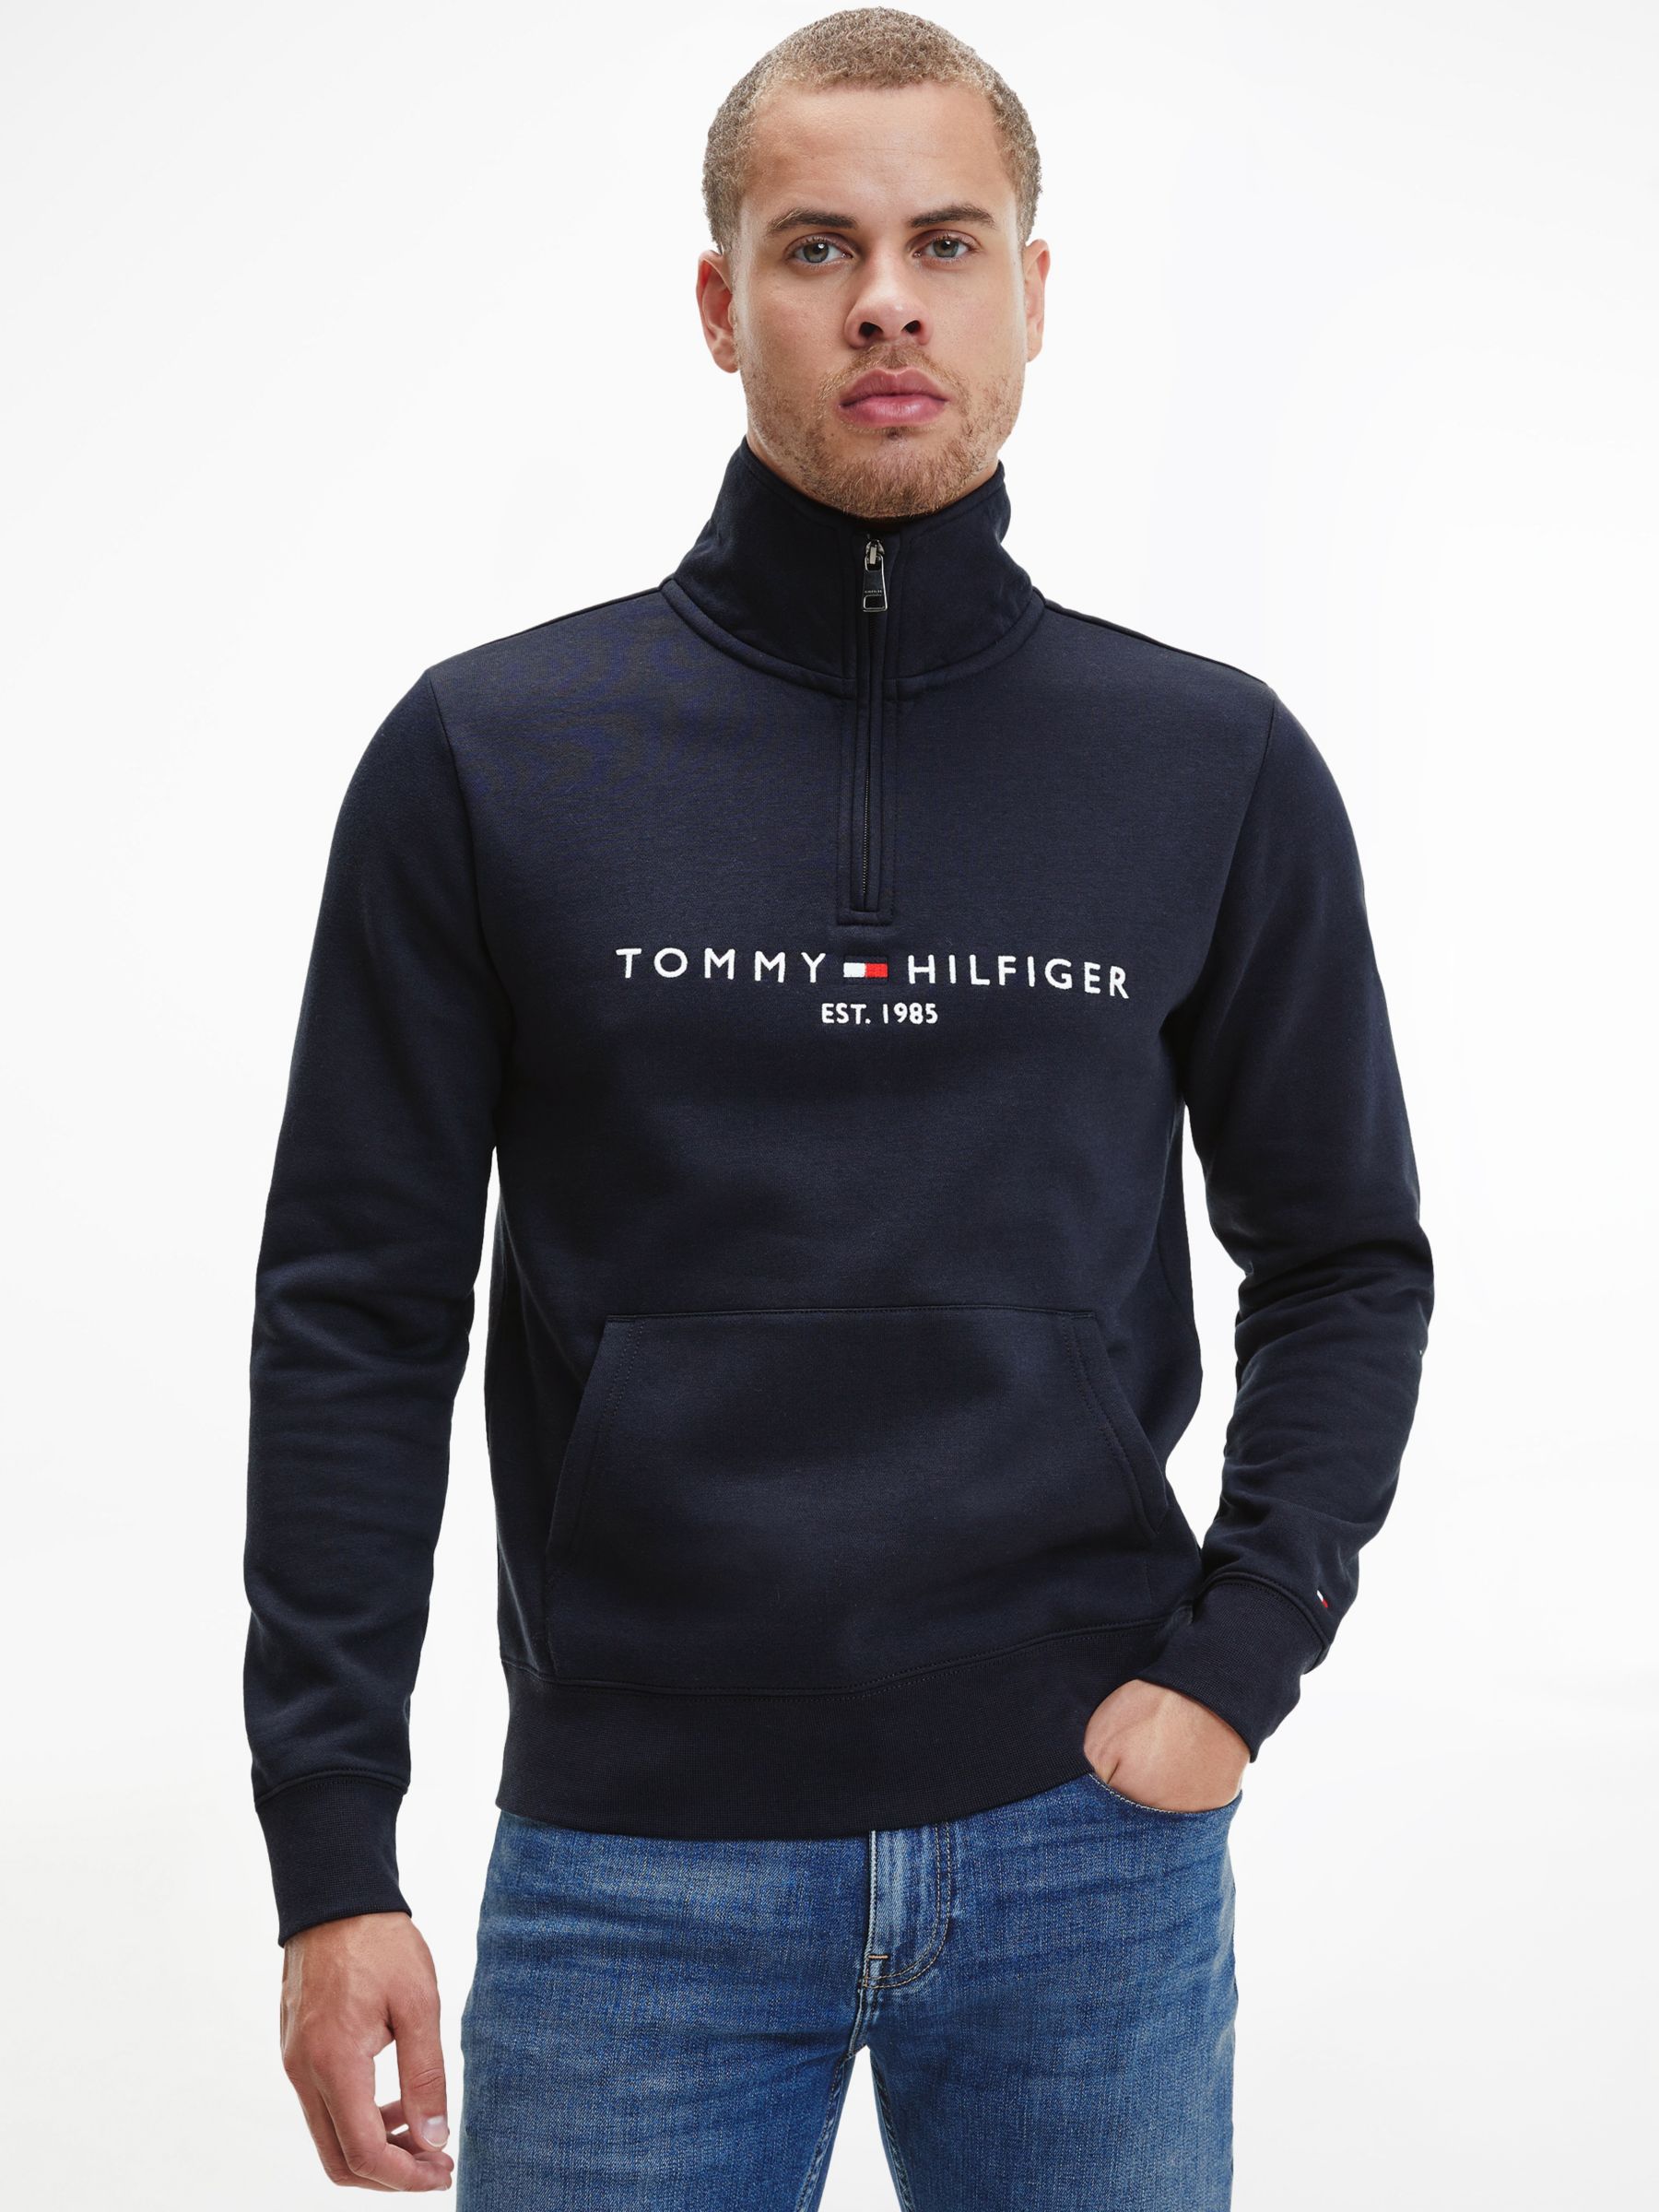 Tommy Hilfiger Sweatshirts for Women, Jumpers